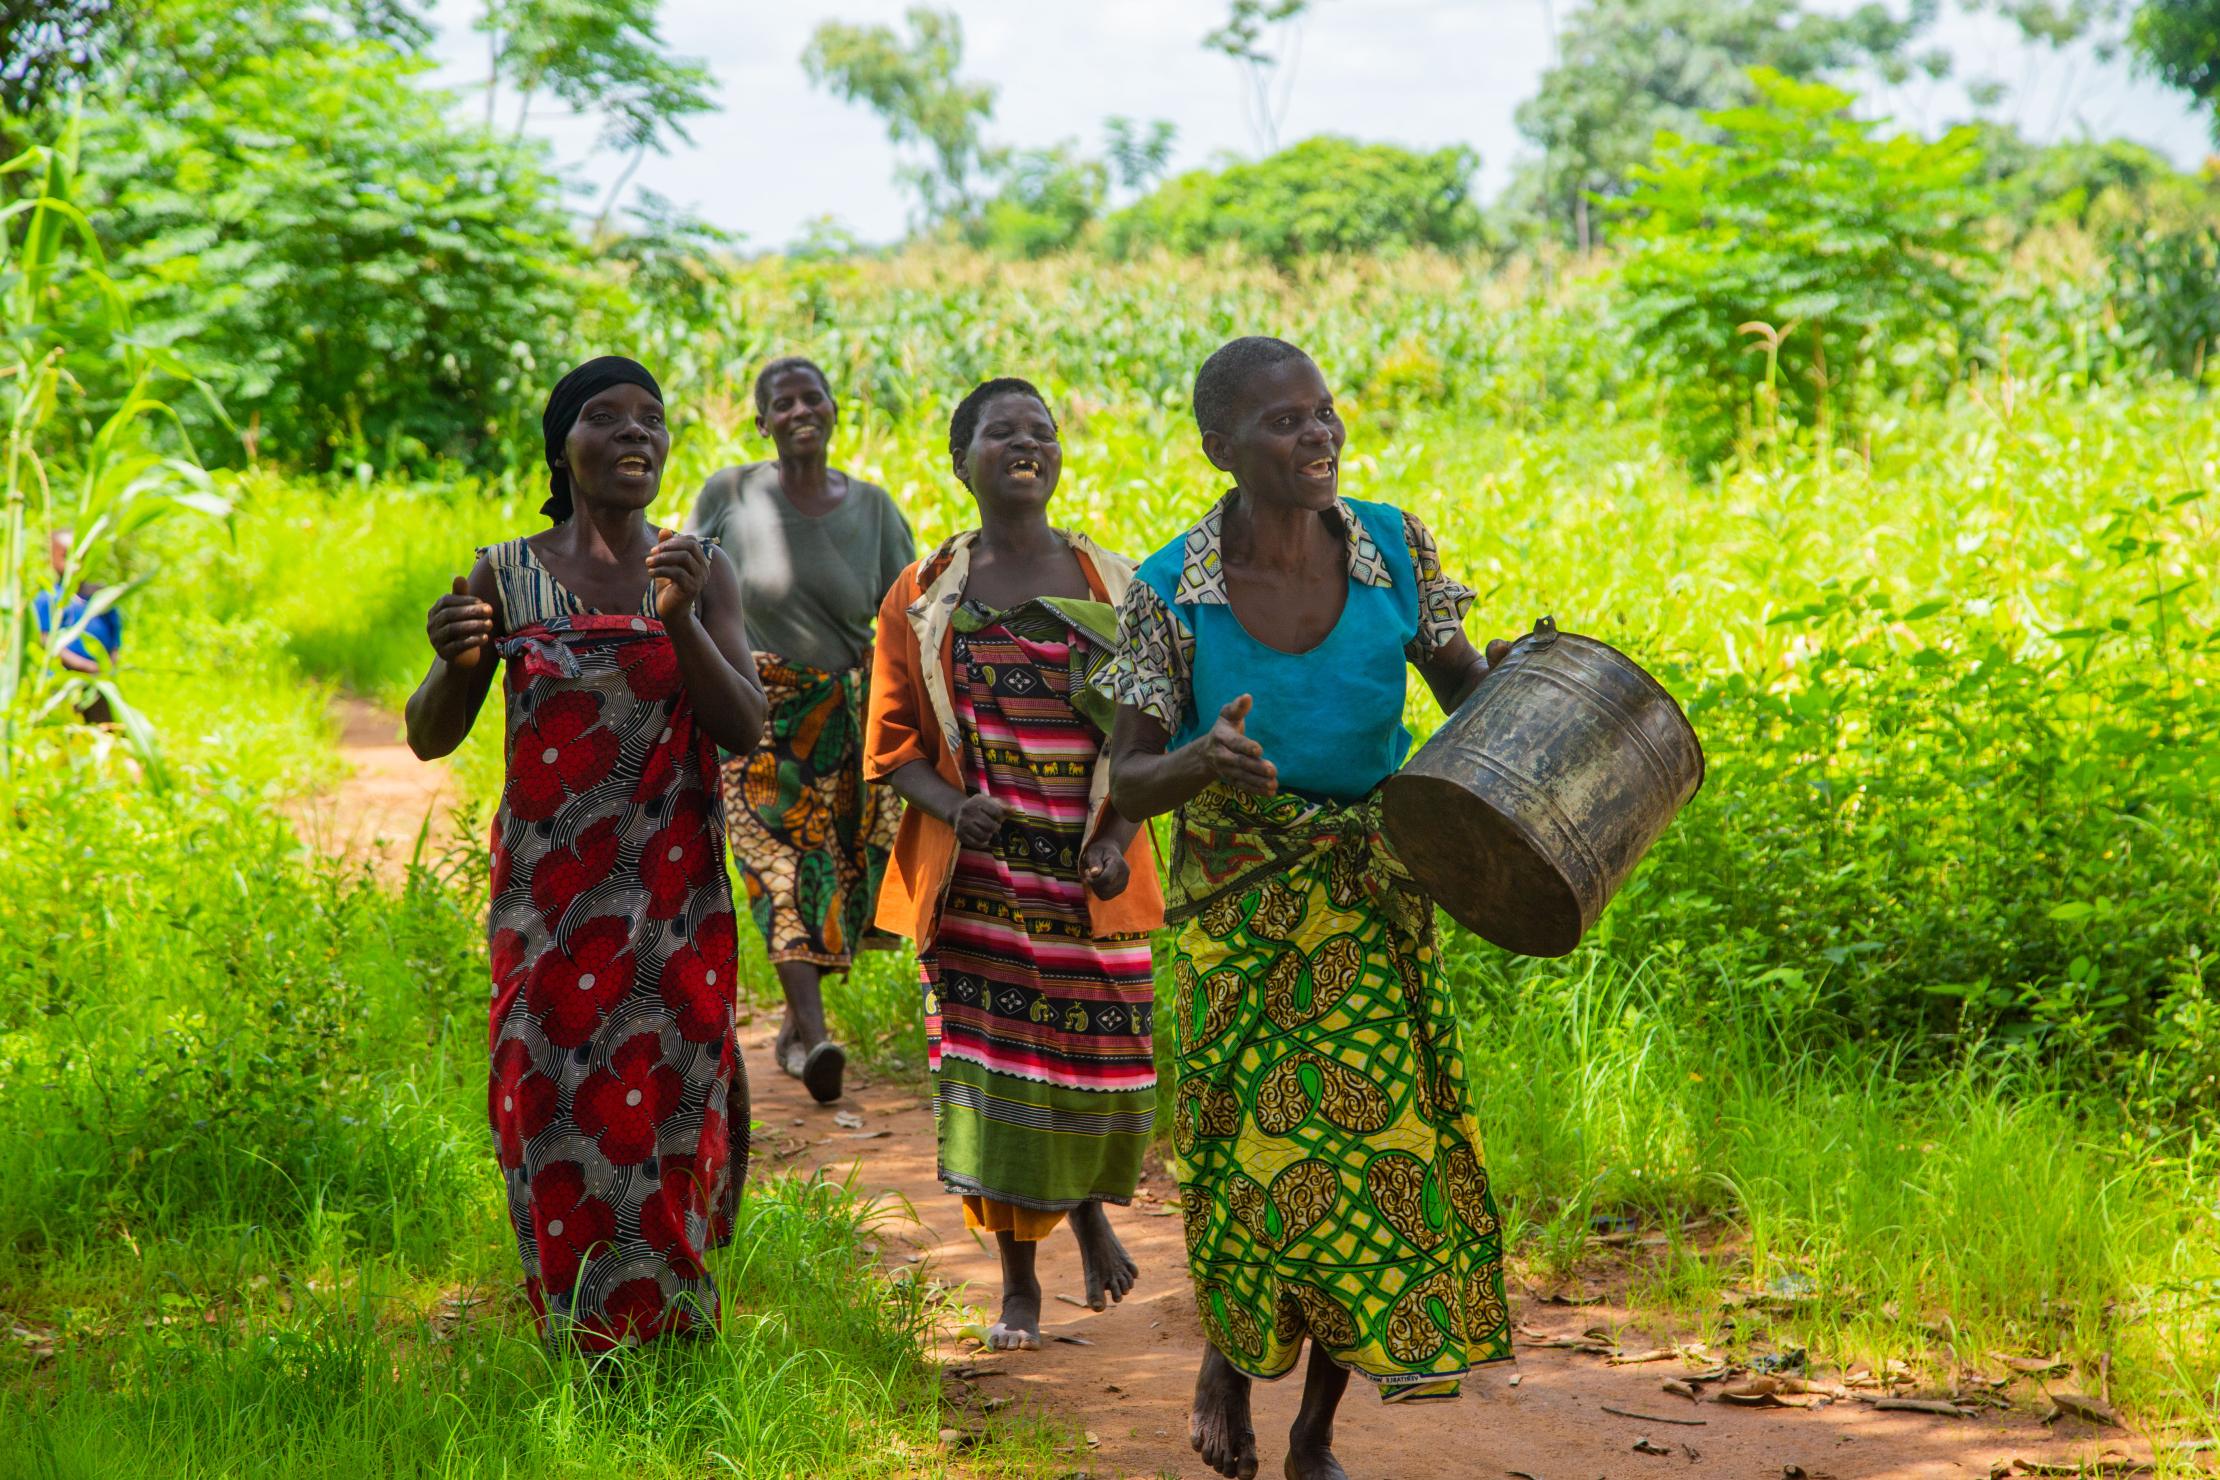 A group of women walking and singing in a field in Malawi